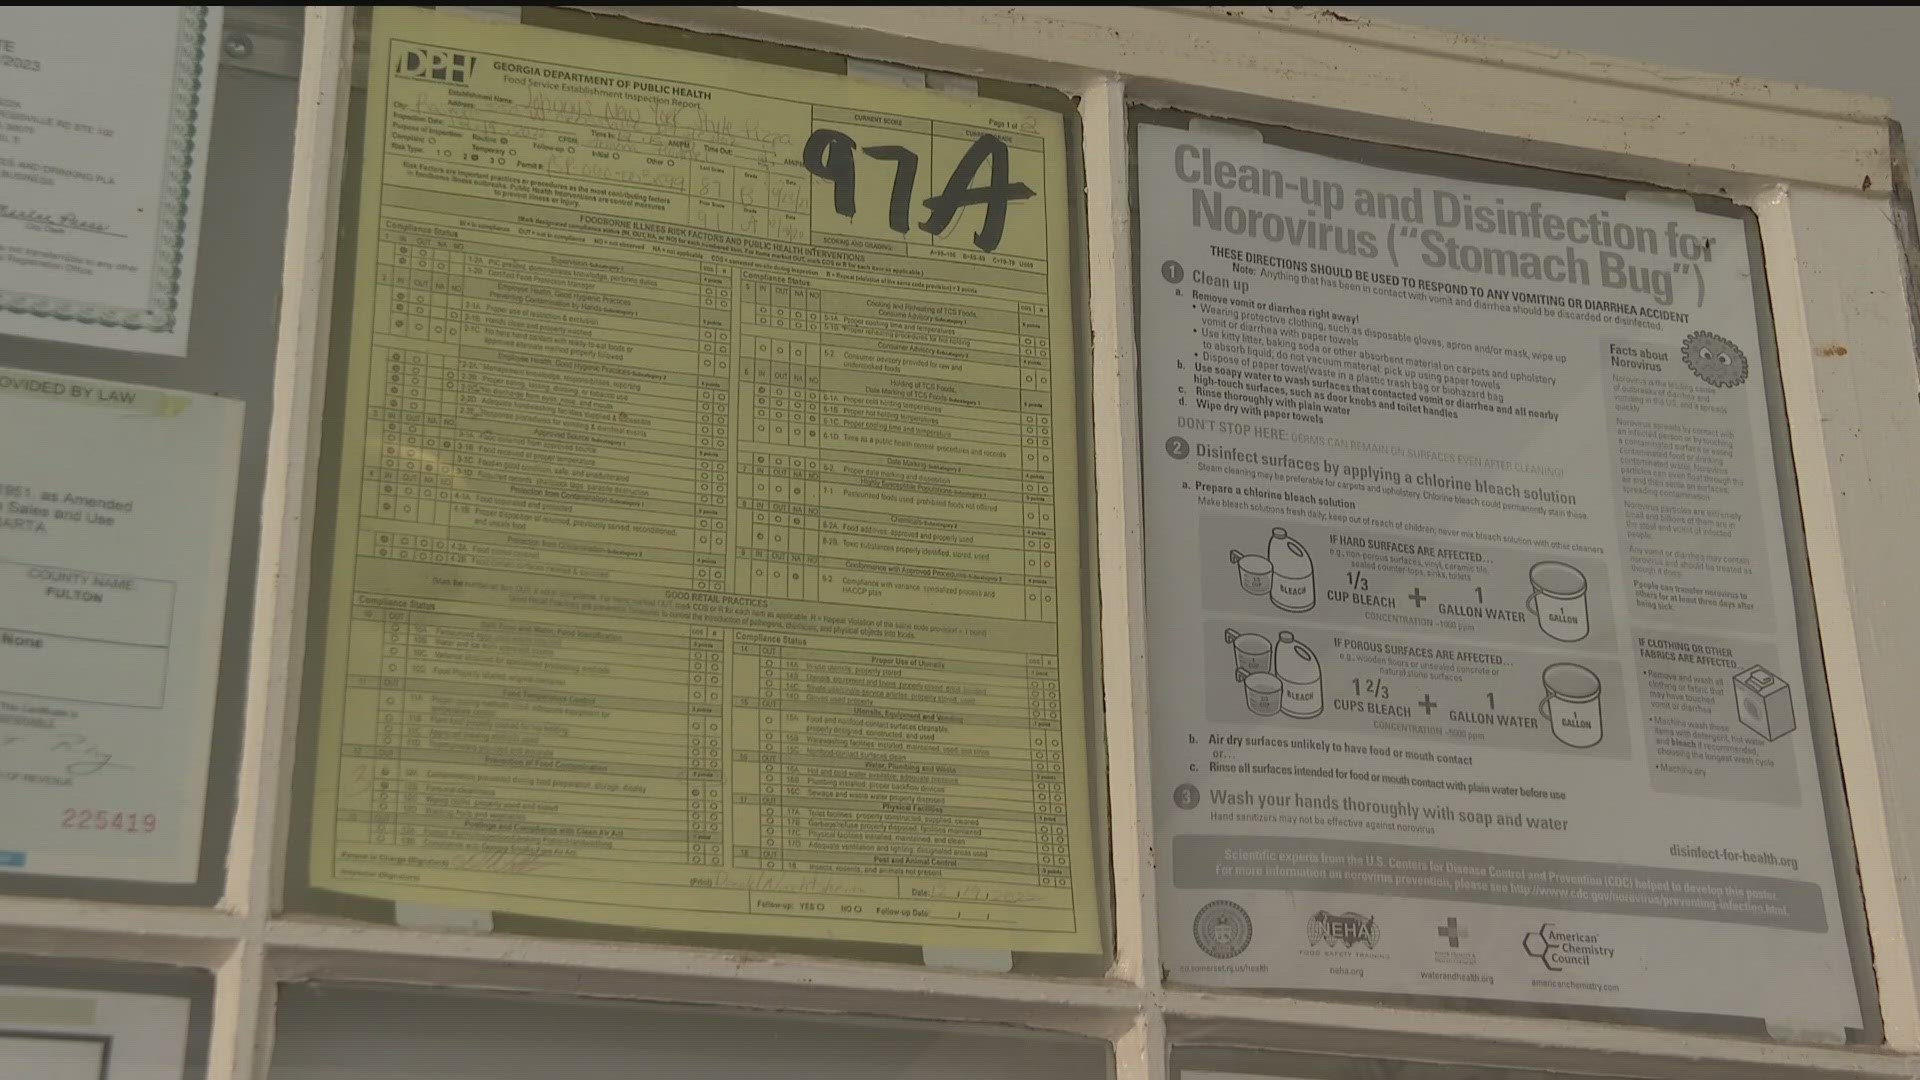 Fulton County is still playing catch up on restaurant health inspections, with some businesses going a year without one.